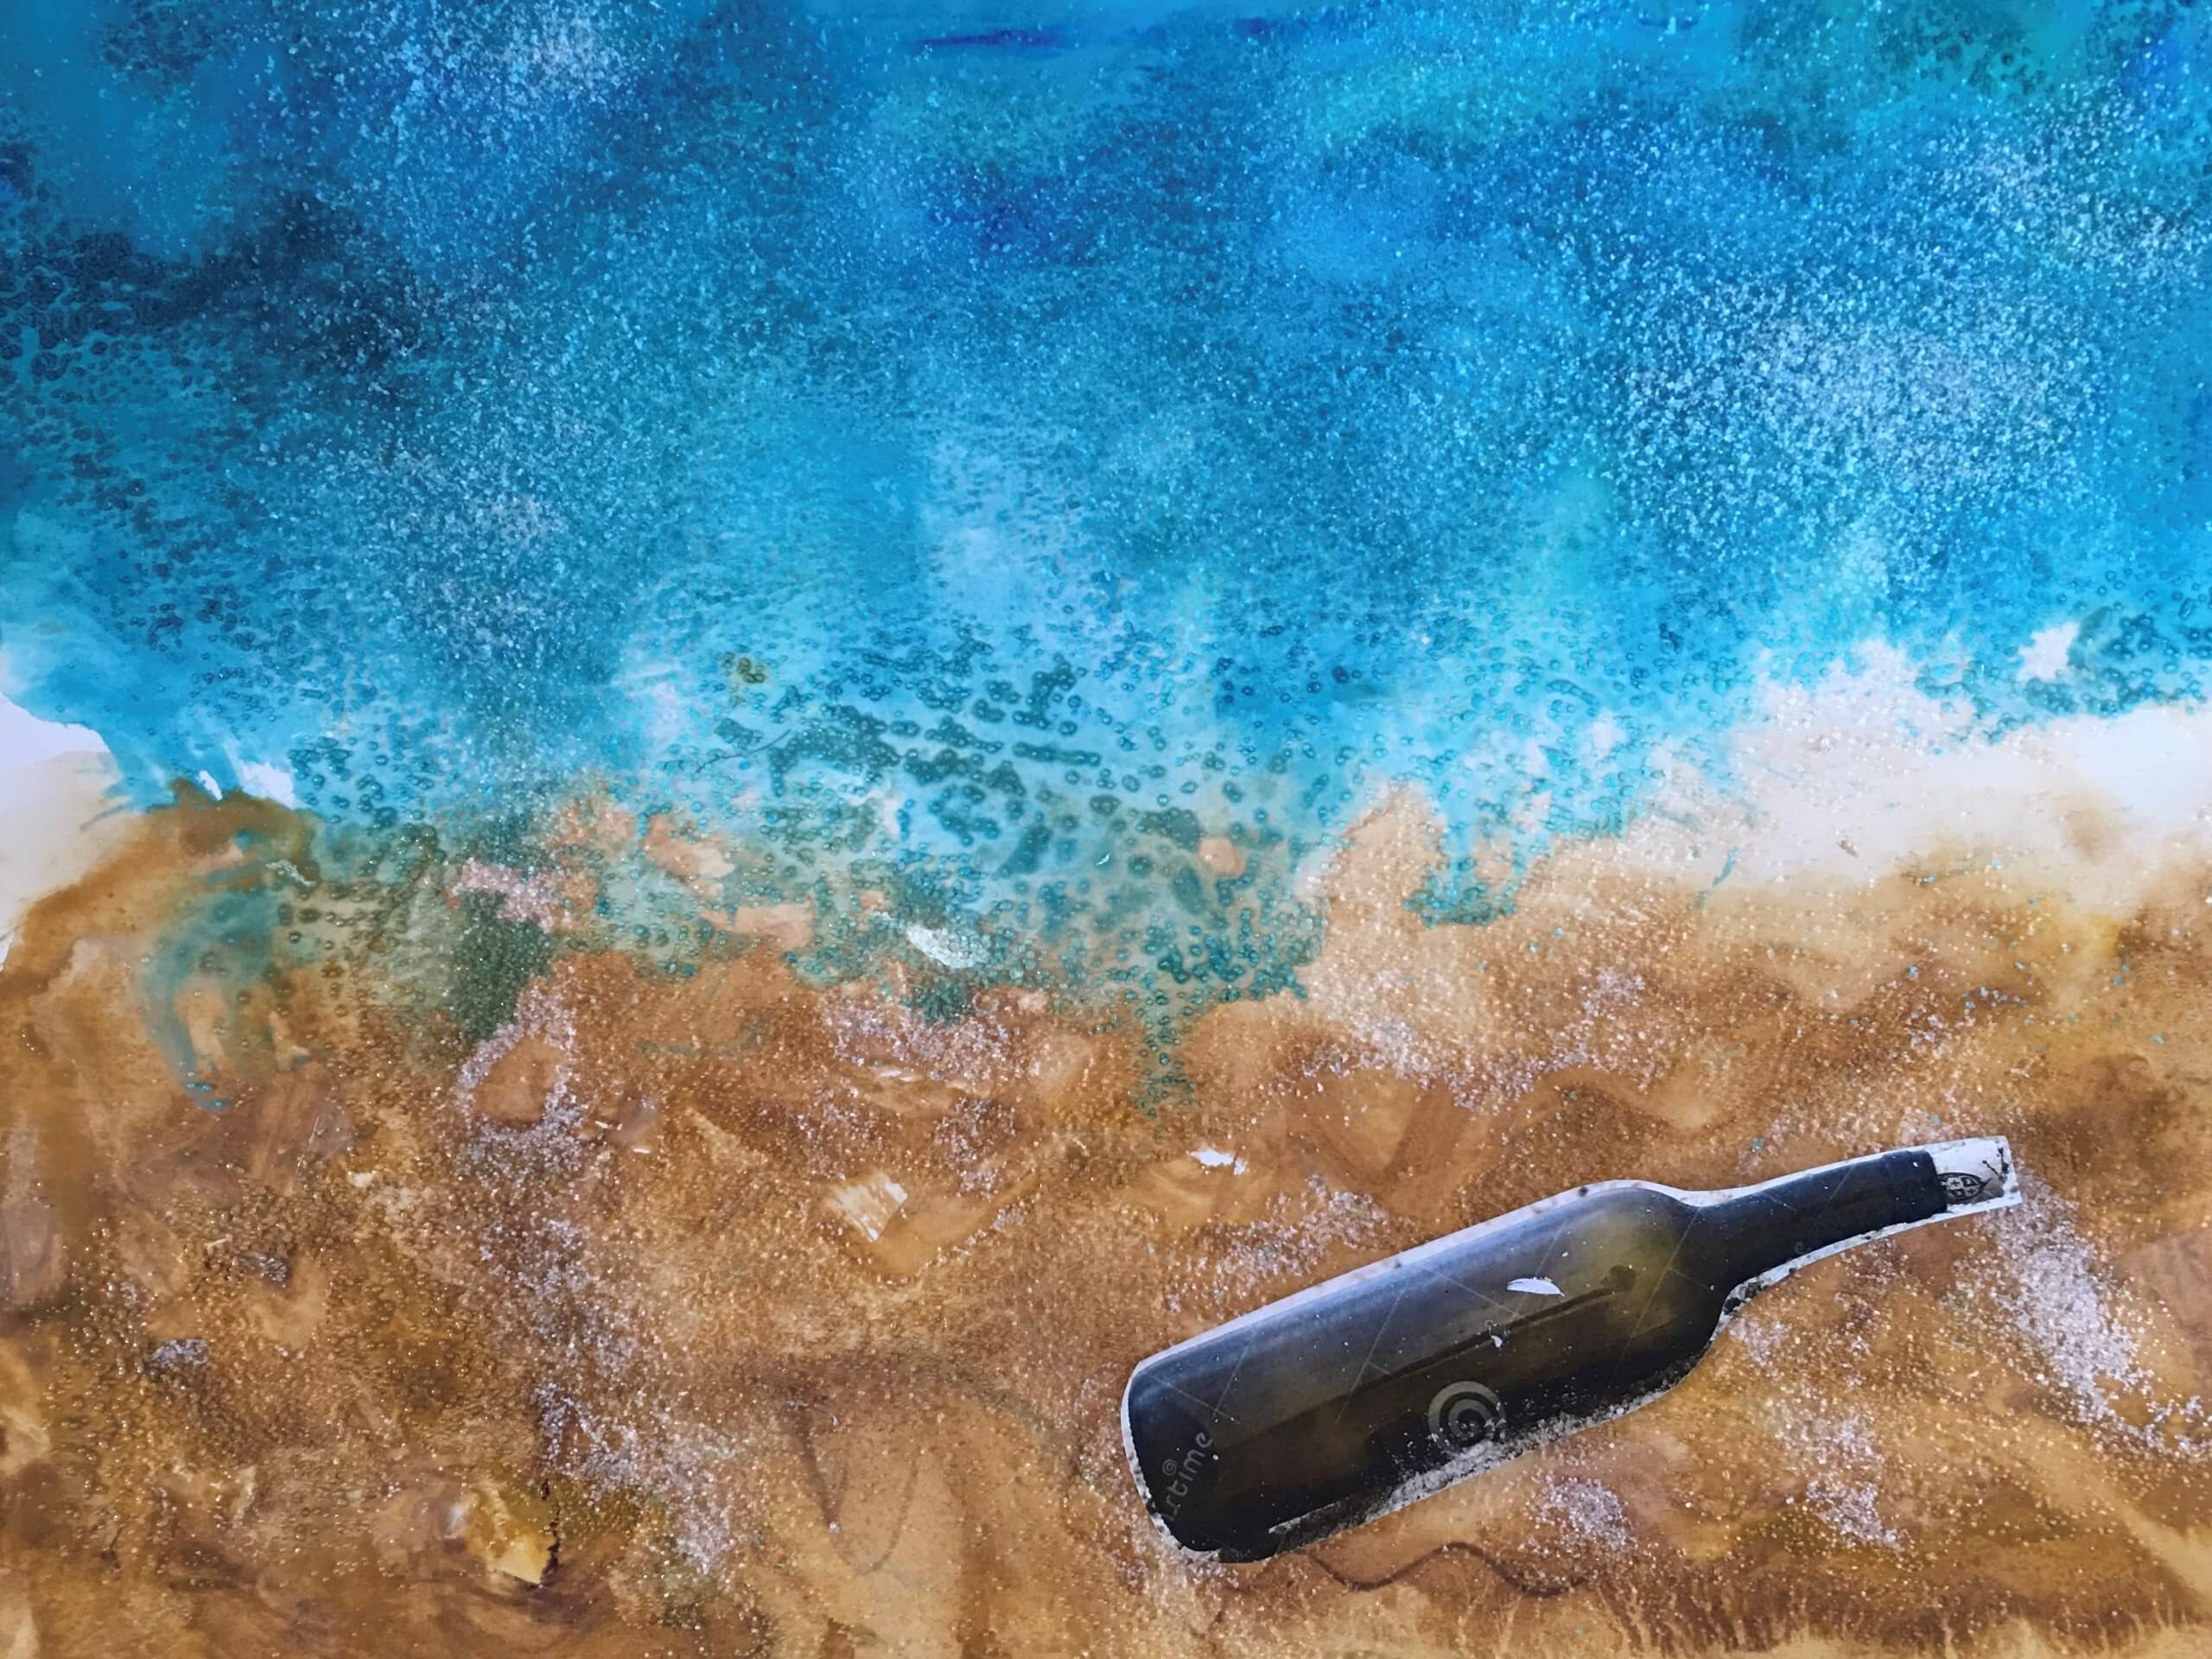 A mixed media artwork that has a textured background that resembles water meeting a shore. A long bottle is cutout and collaged in the lower right as if it has washed to shore.